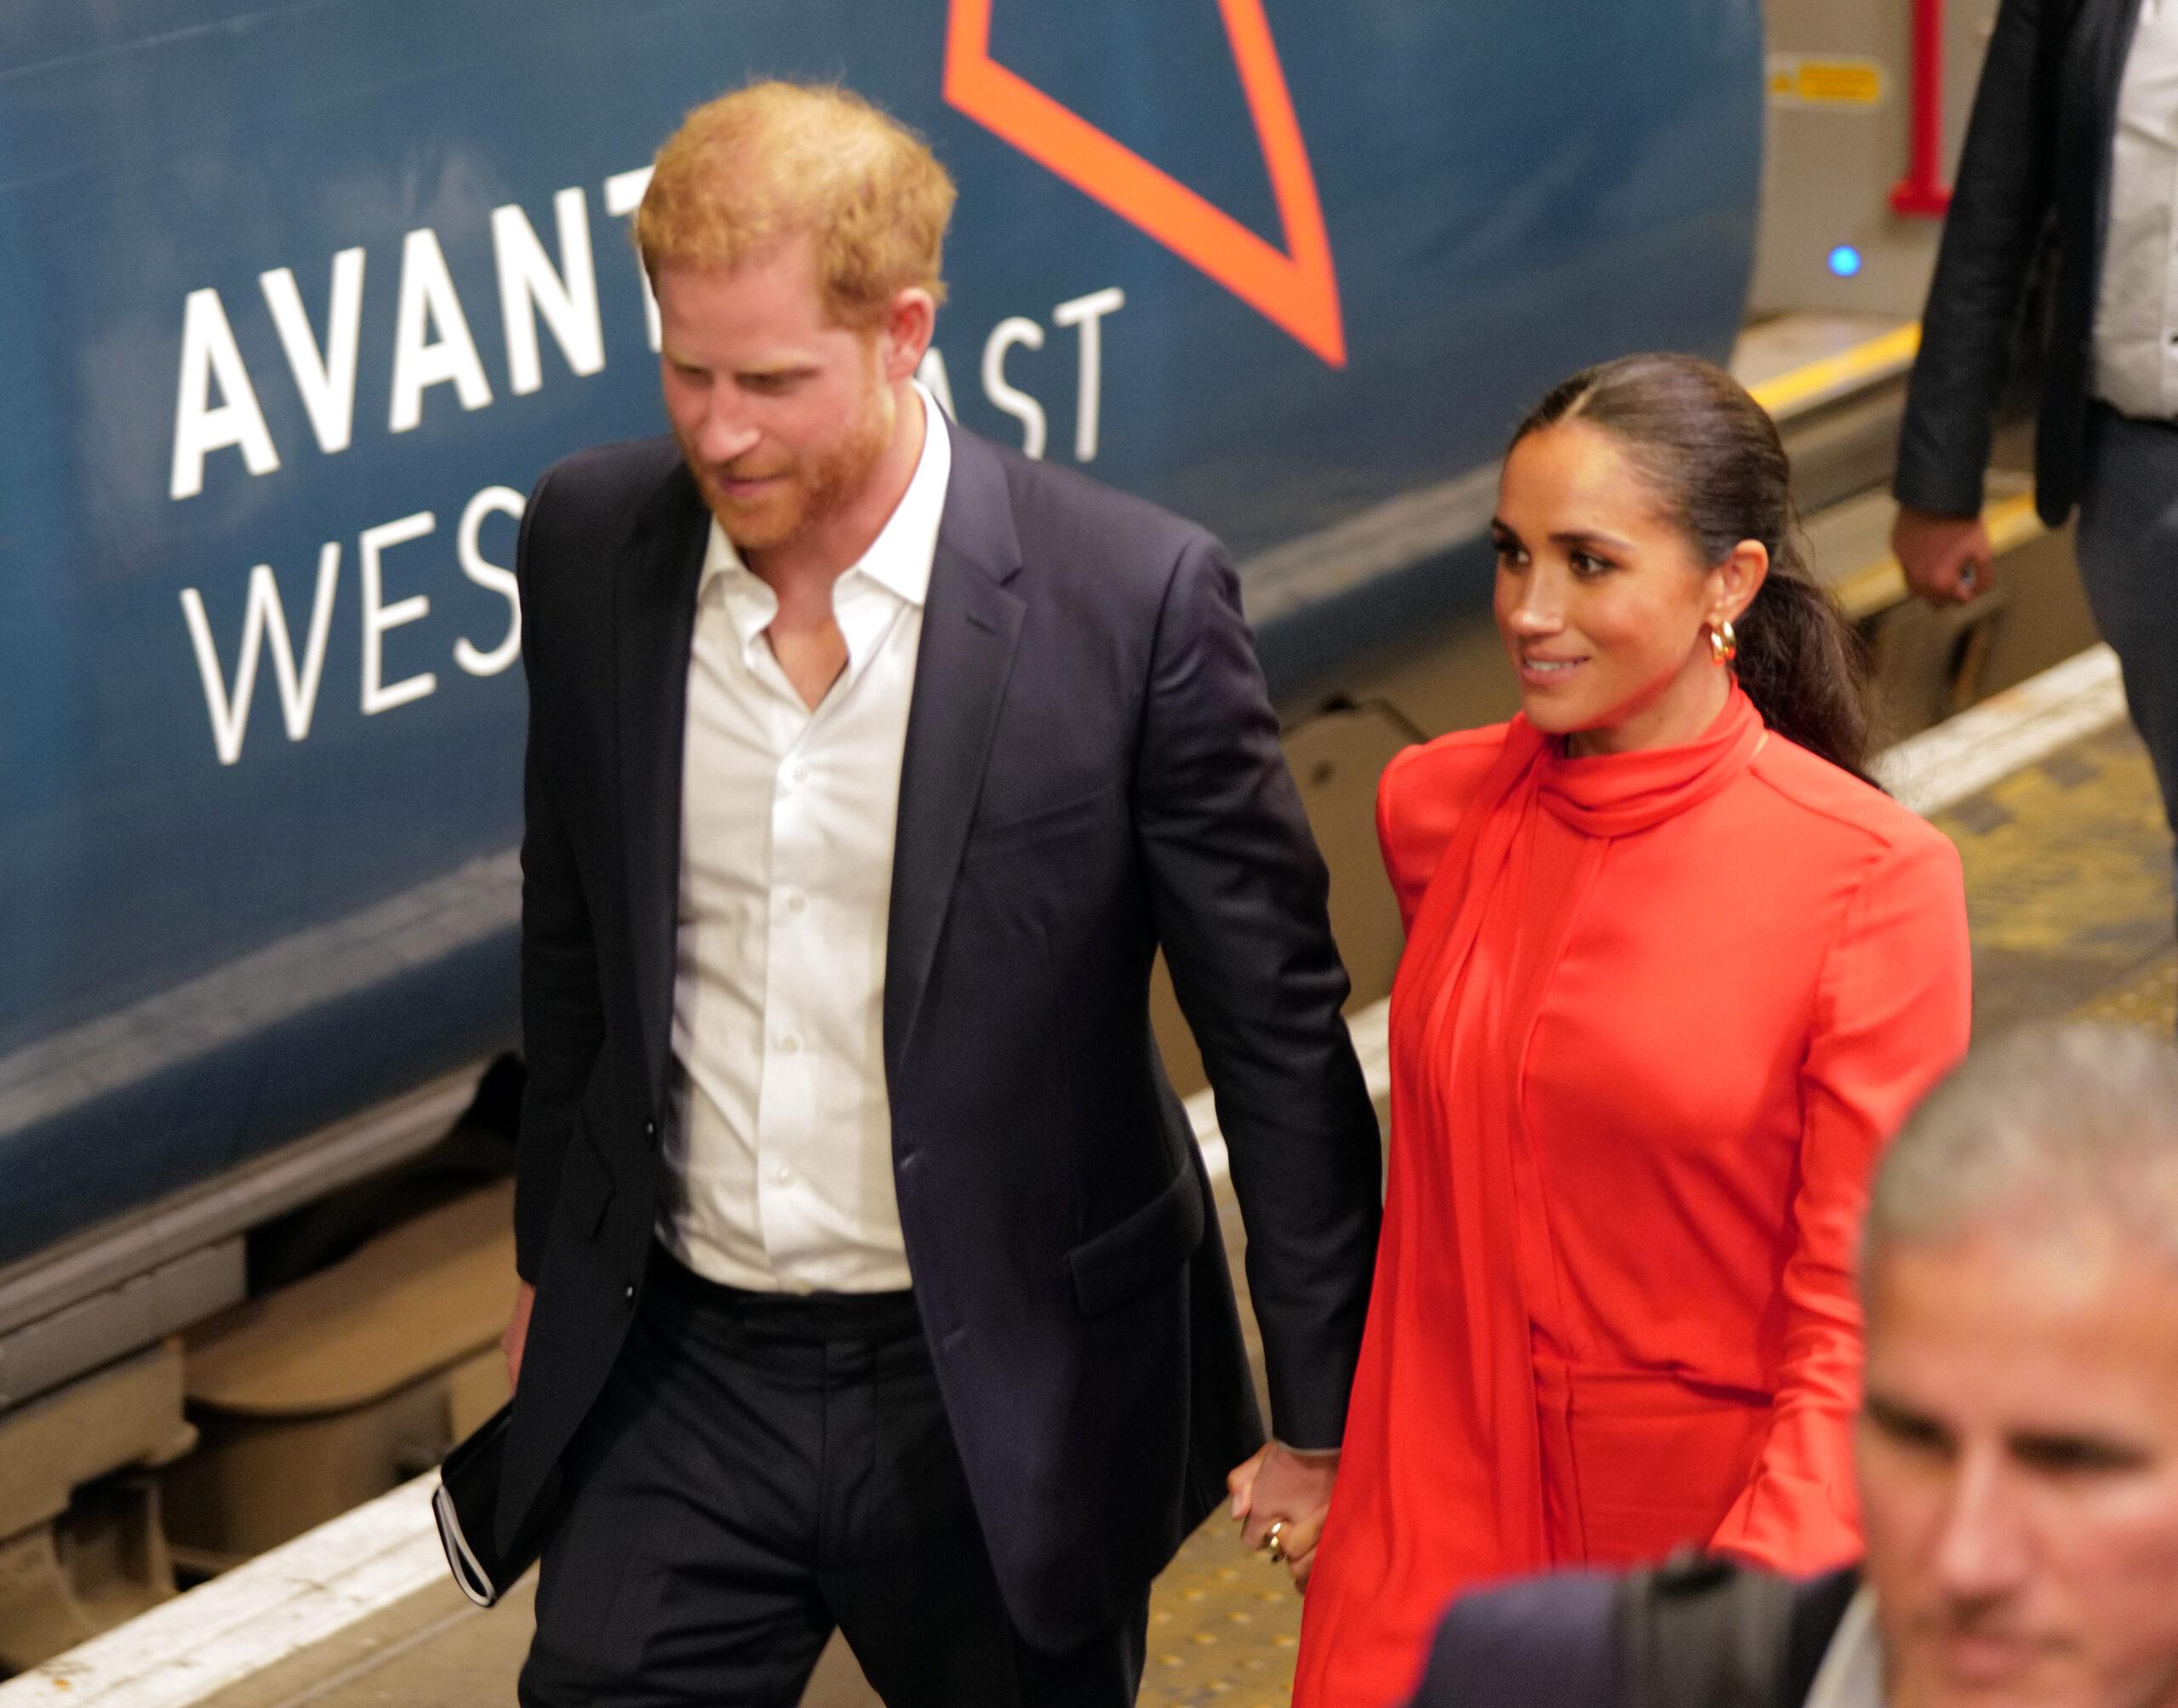 Prince Harry and Meghan Markle arrive back at Euston station in London